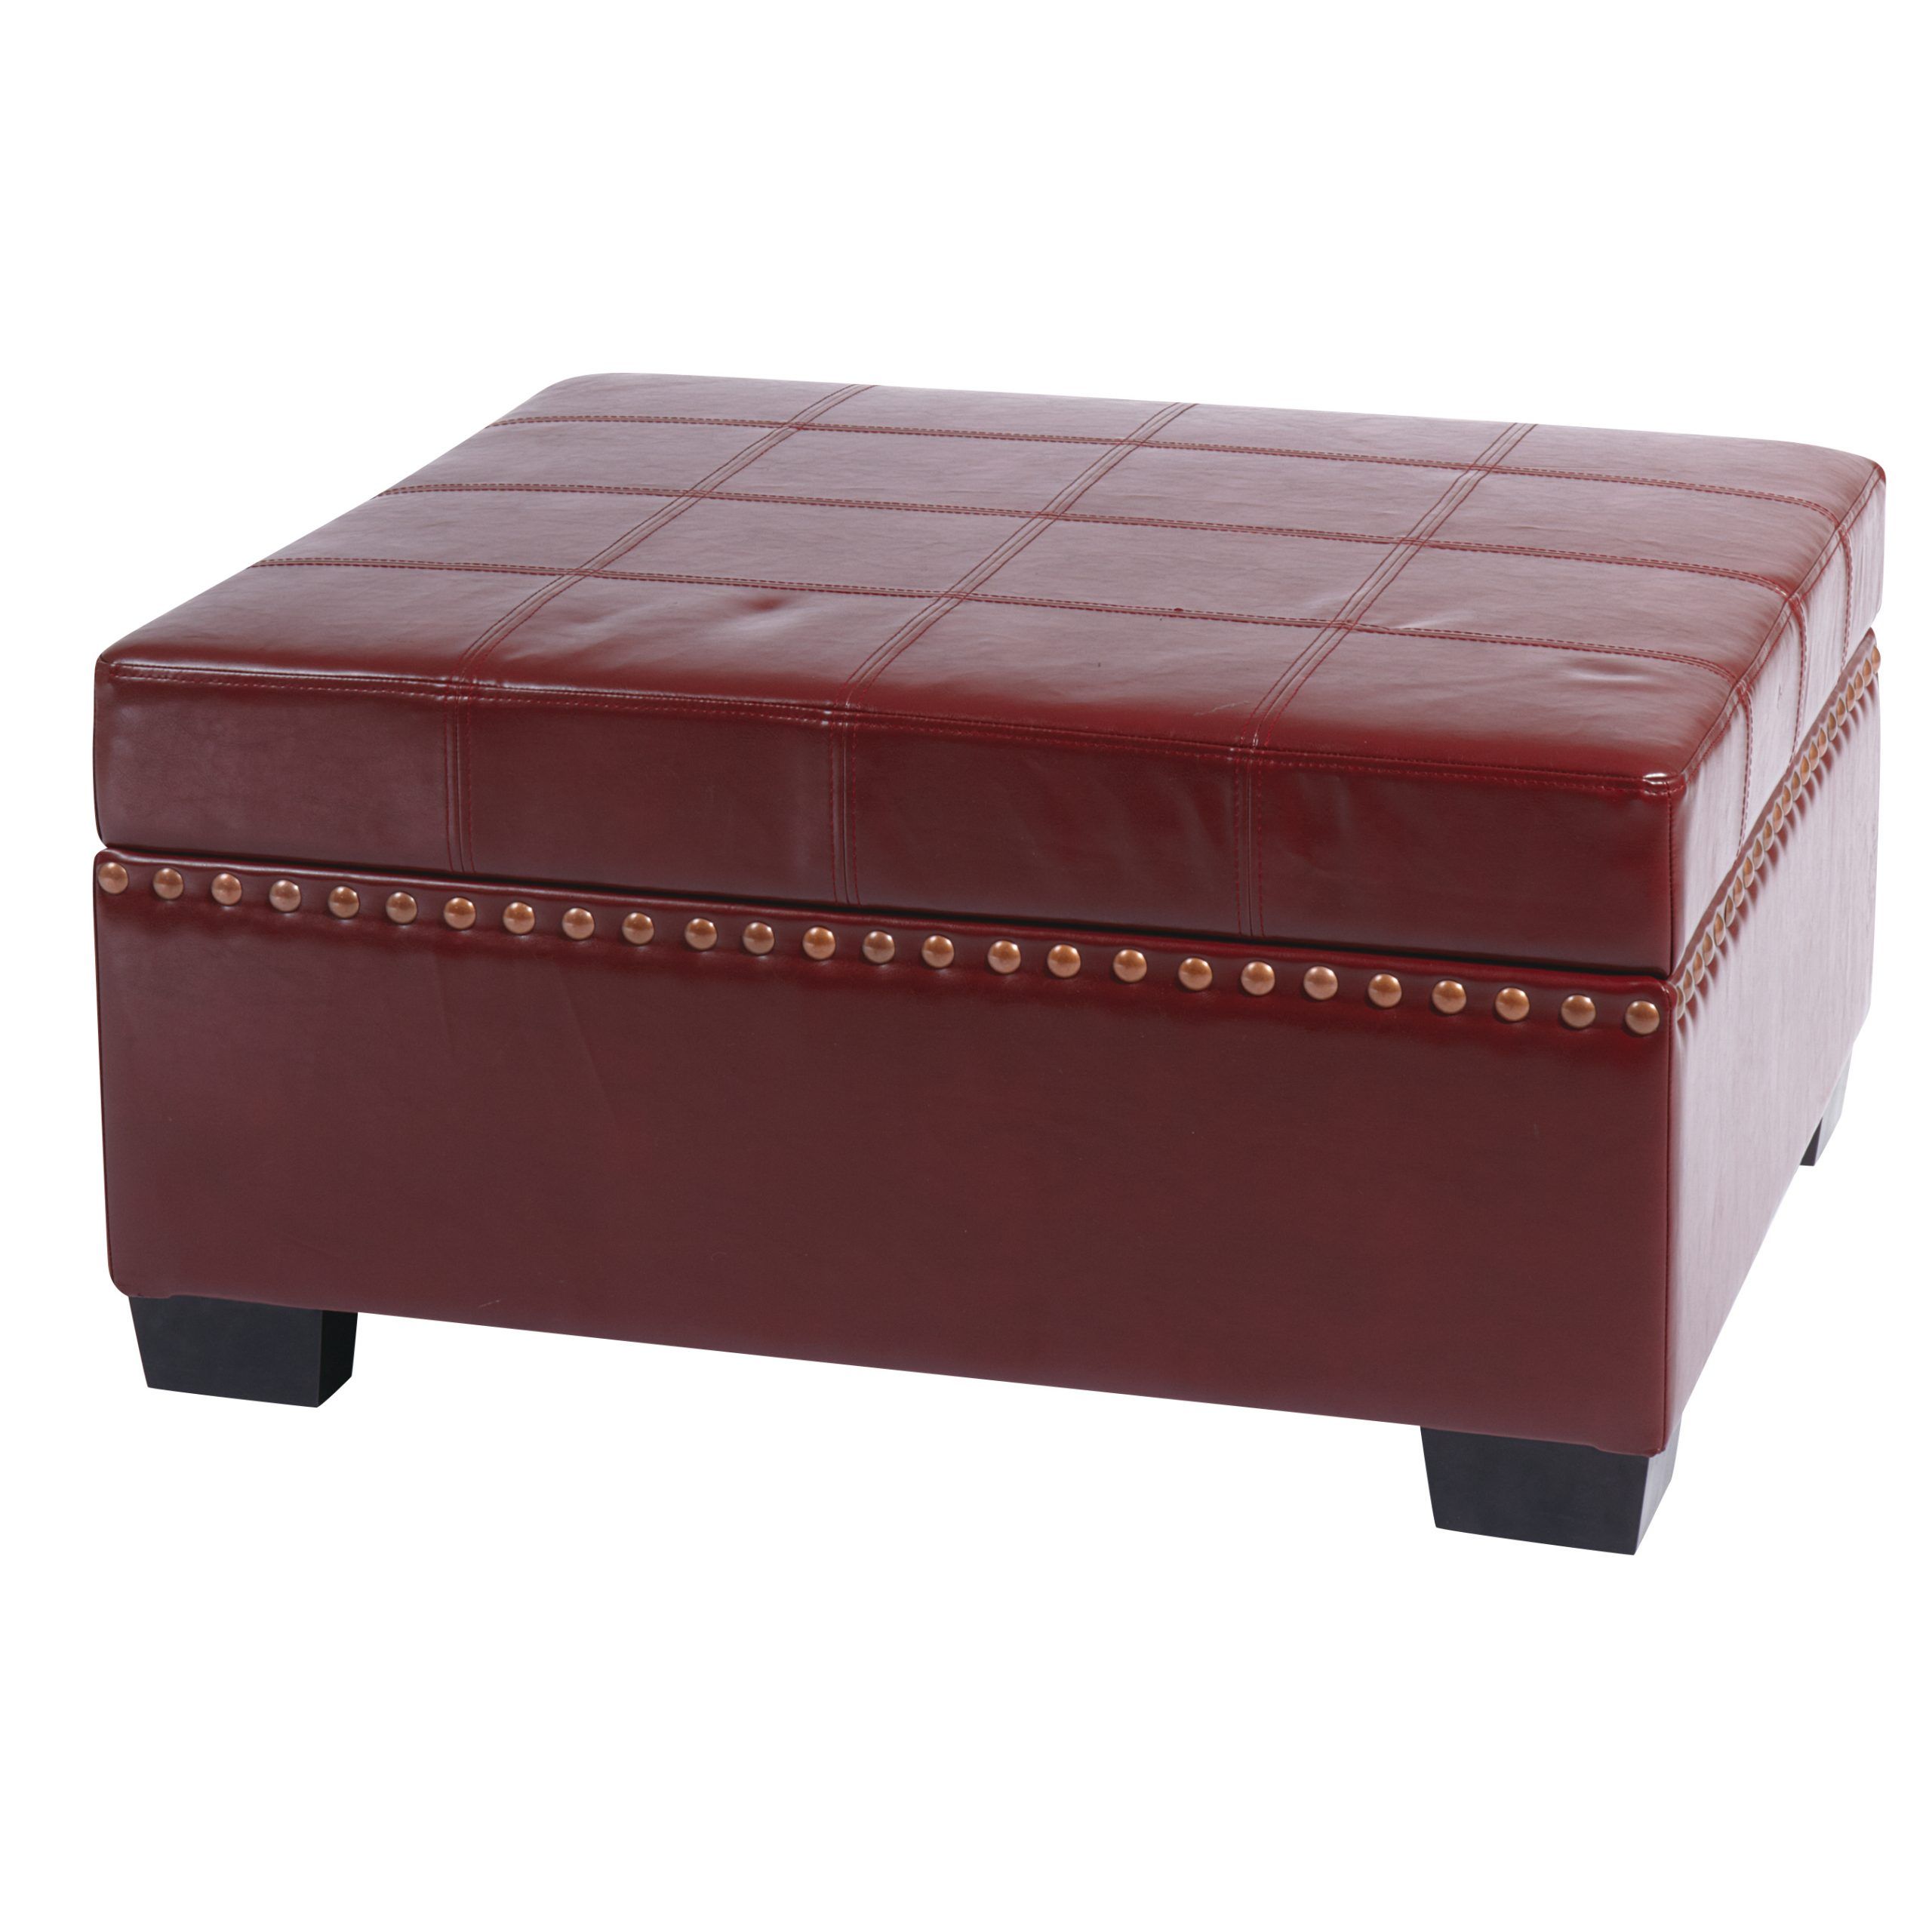 Nailhead Detour Storage Ottoman With Tray, Multiple Colors – Walmart Regarding Well Known Multi Color Fabric Storage Ottomans (View 3 of 10)